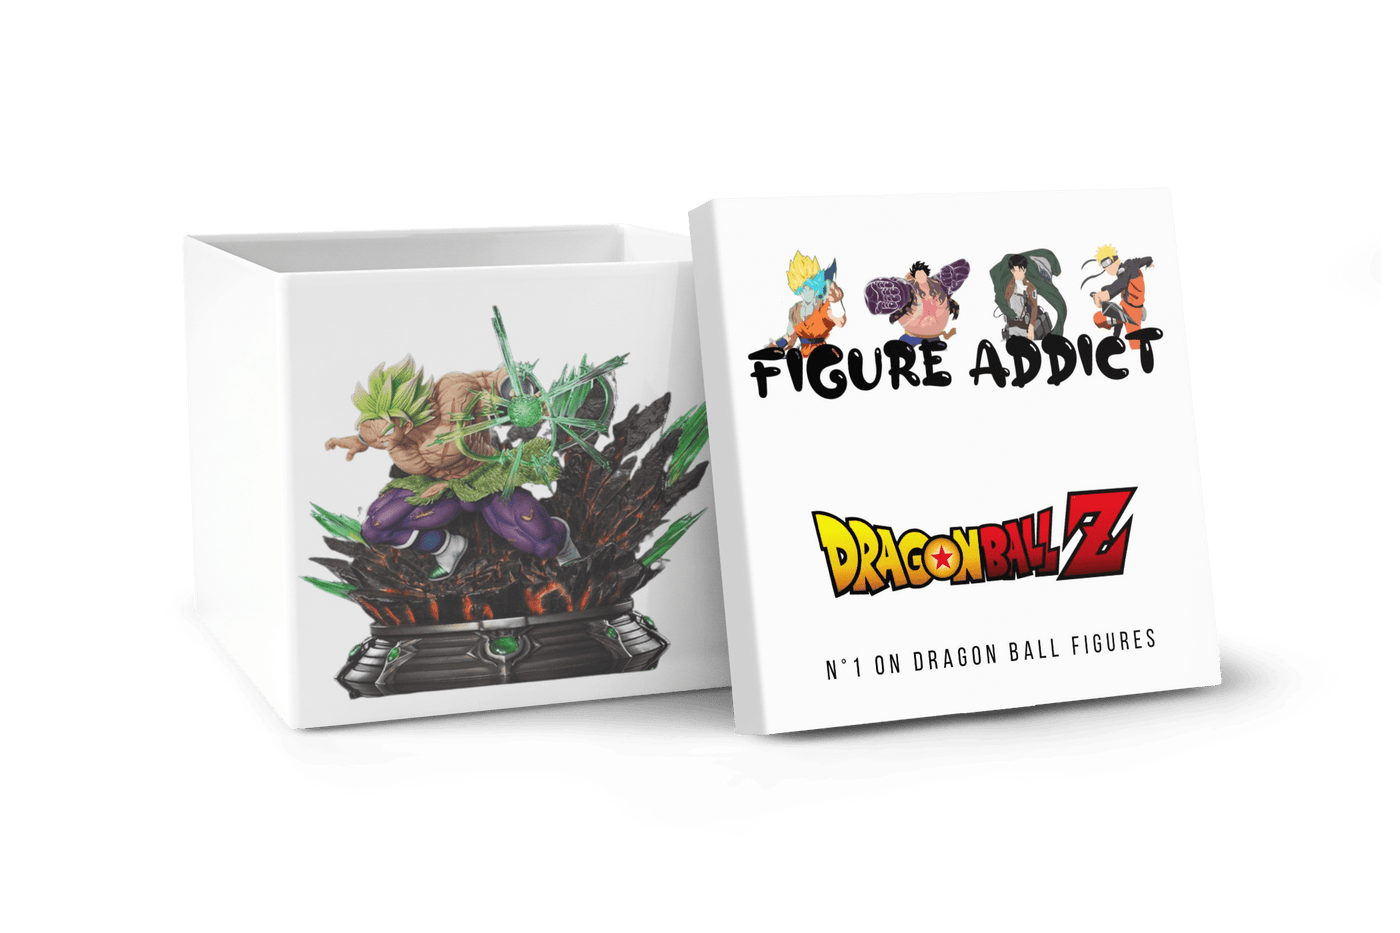 Limited Edition Broly Resin Figure 0 Figure Addict